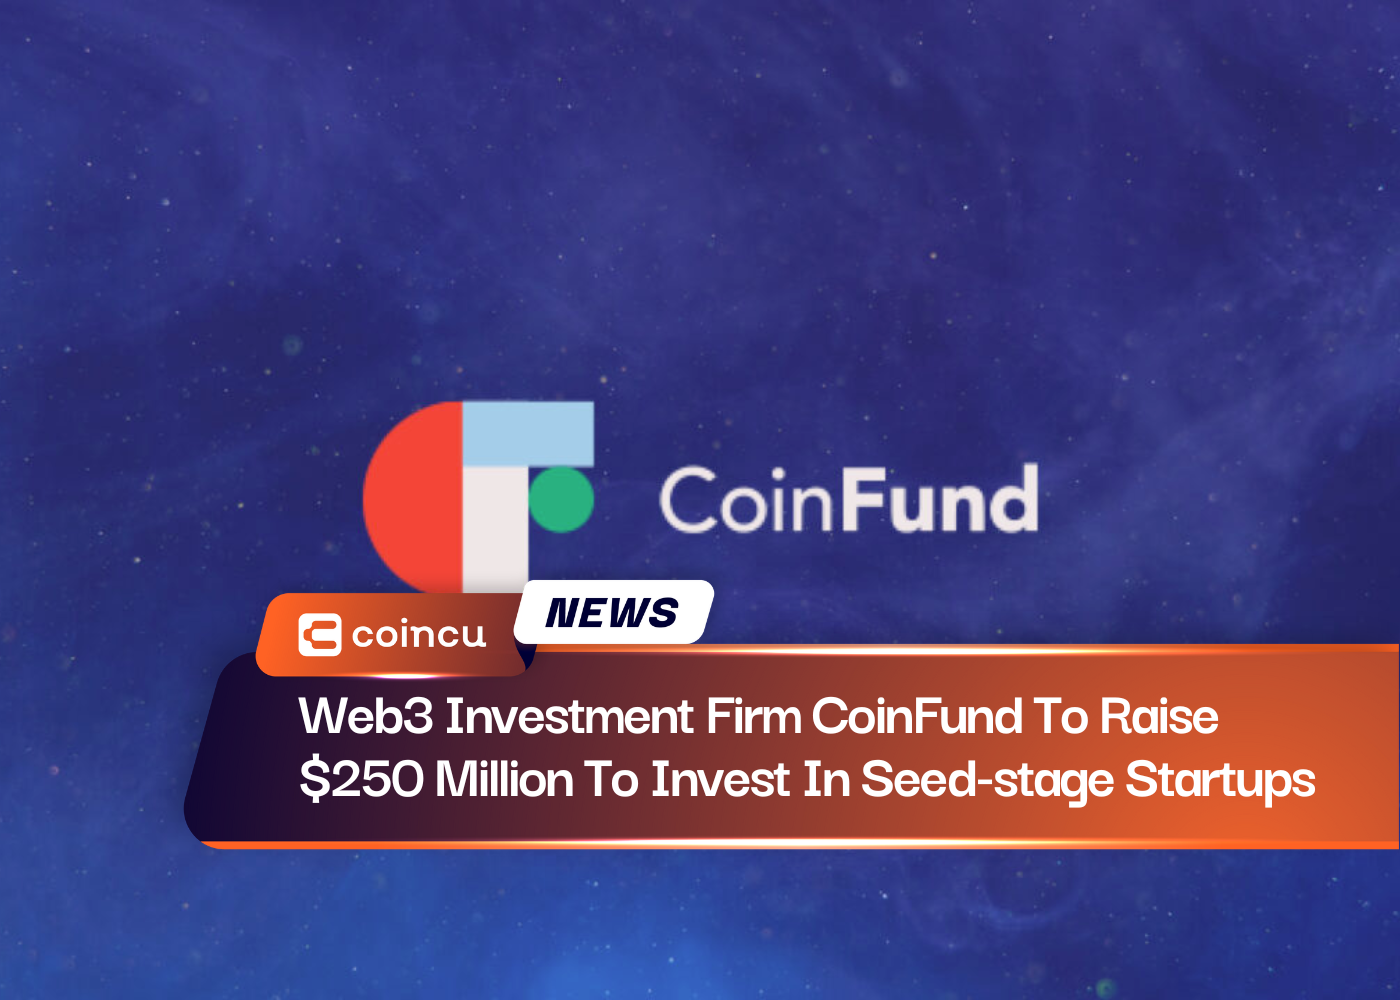 Web3 Investment Firm CoinFund To Raise $250 Million To Invest In Seed-stage Startups